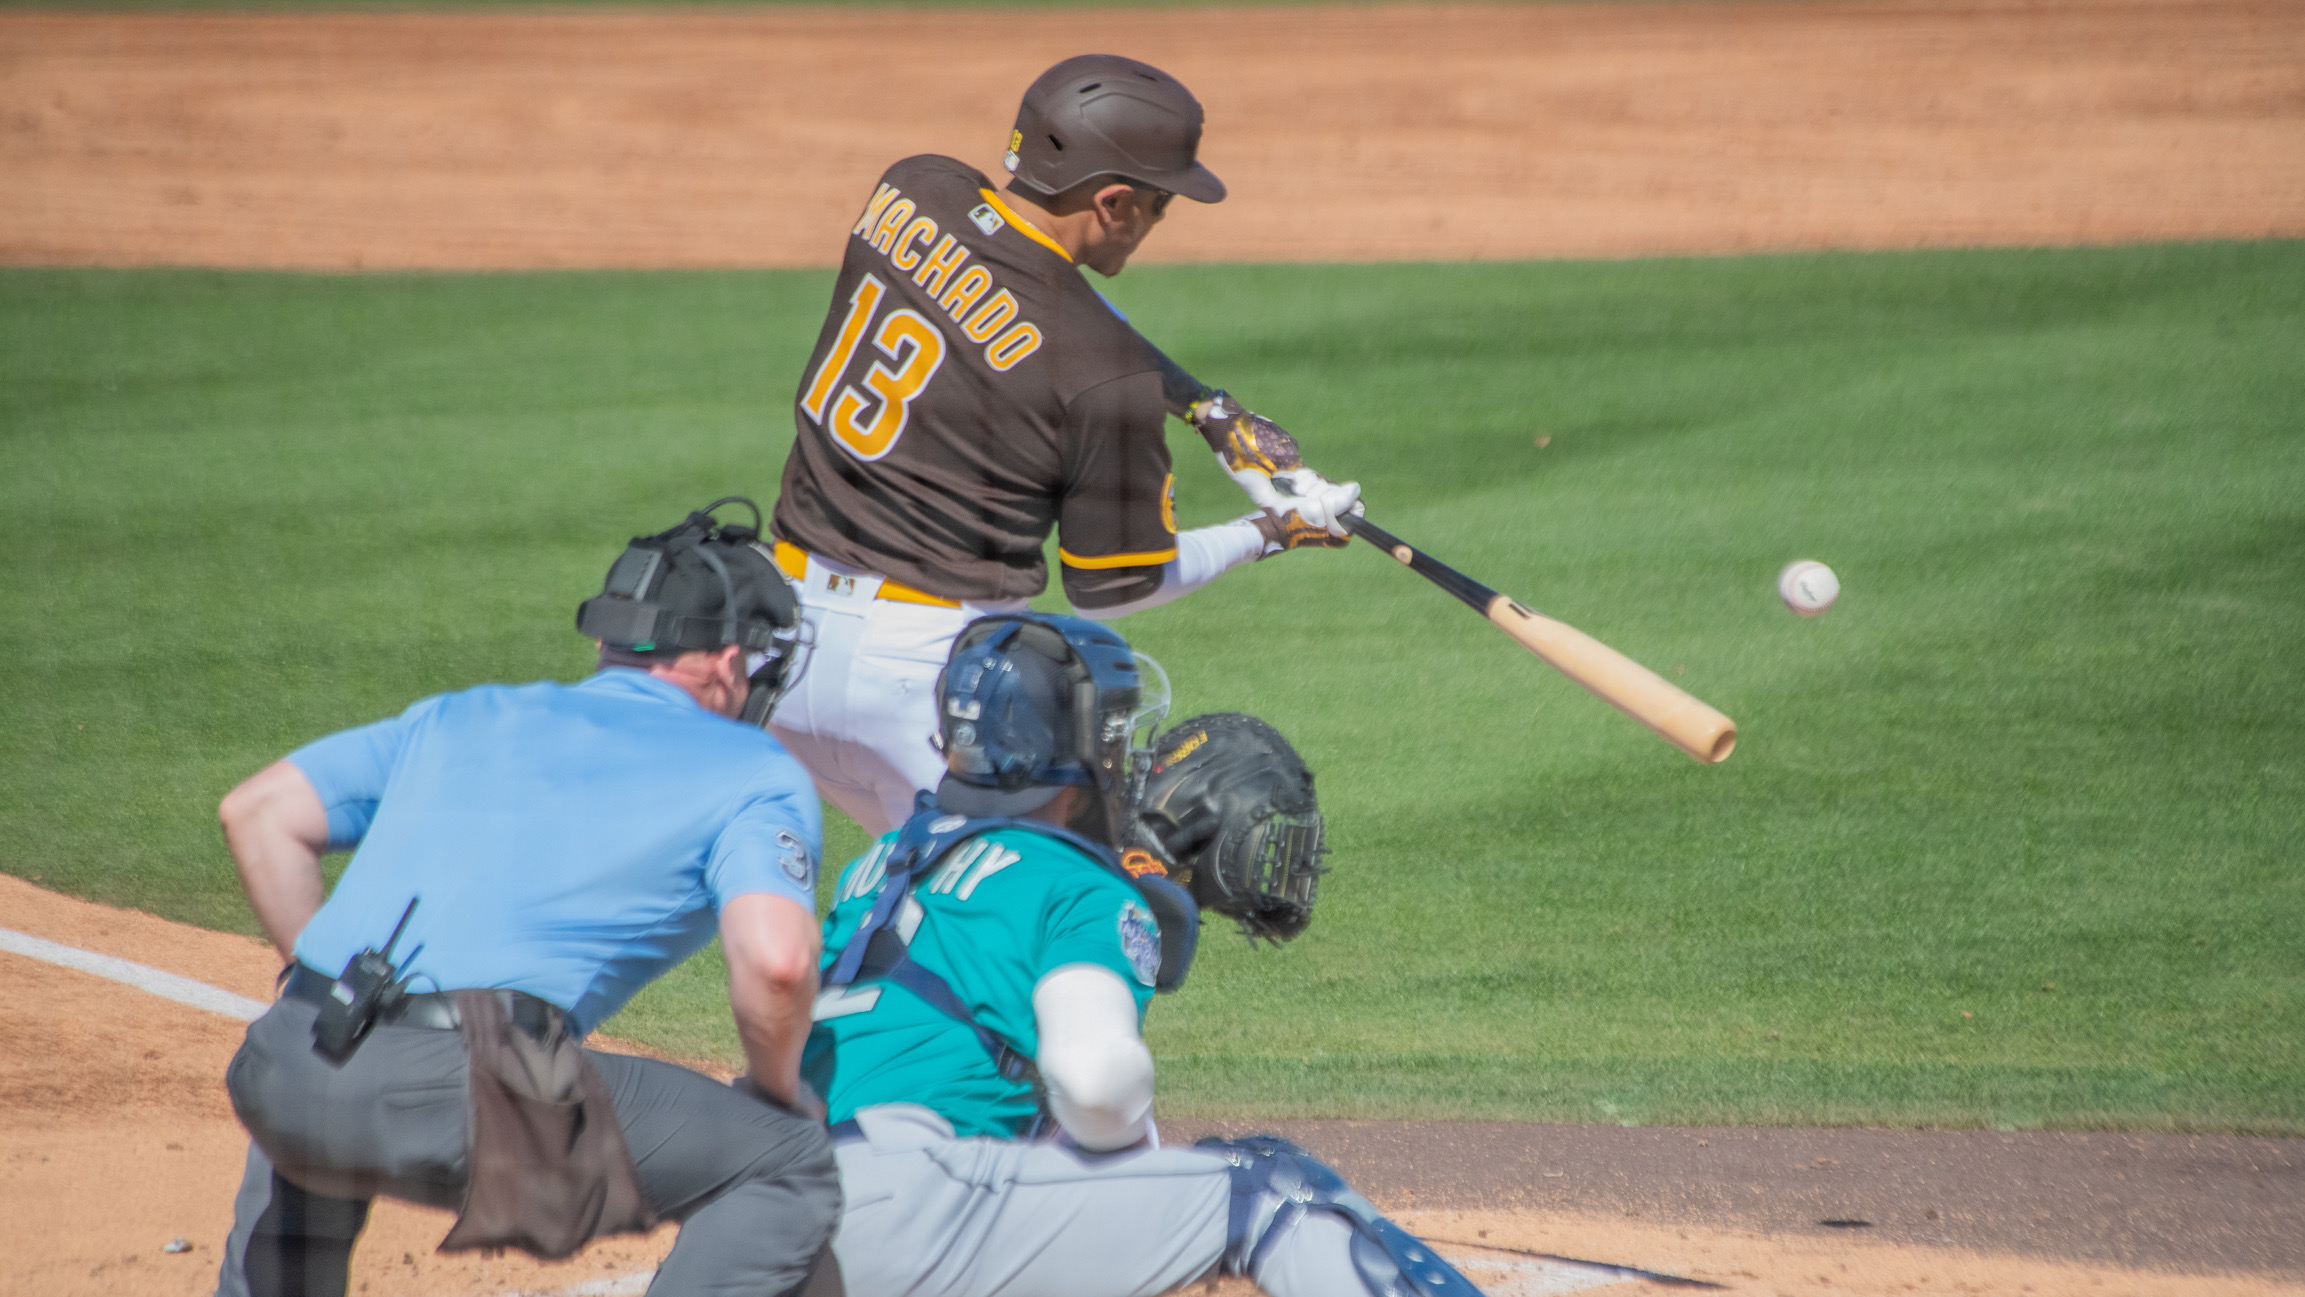 Manny Machado takes a swing during a Spring Training game with the Seattle Mariners at Peoria Sports Complex.